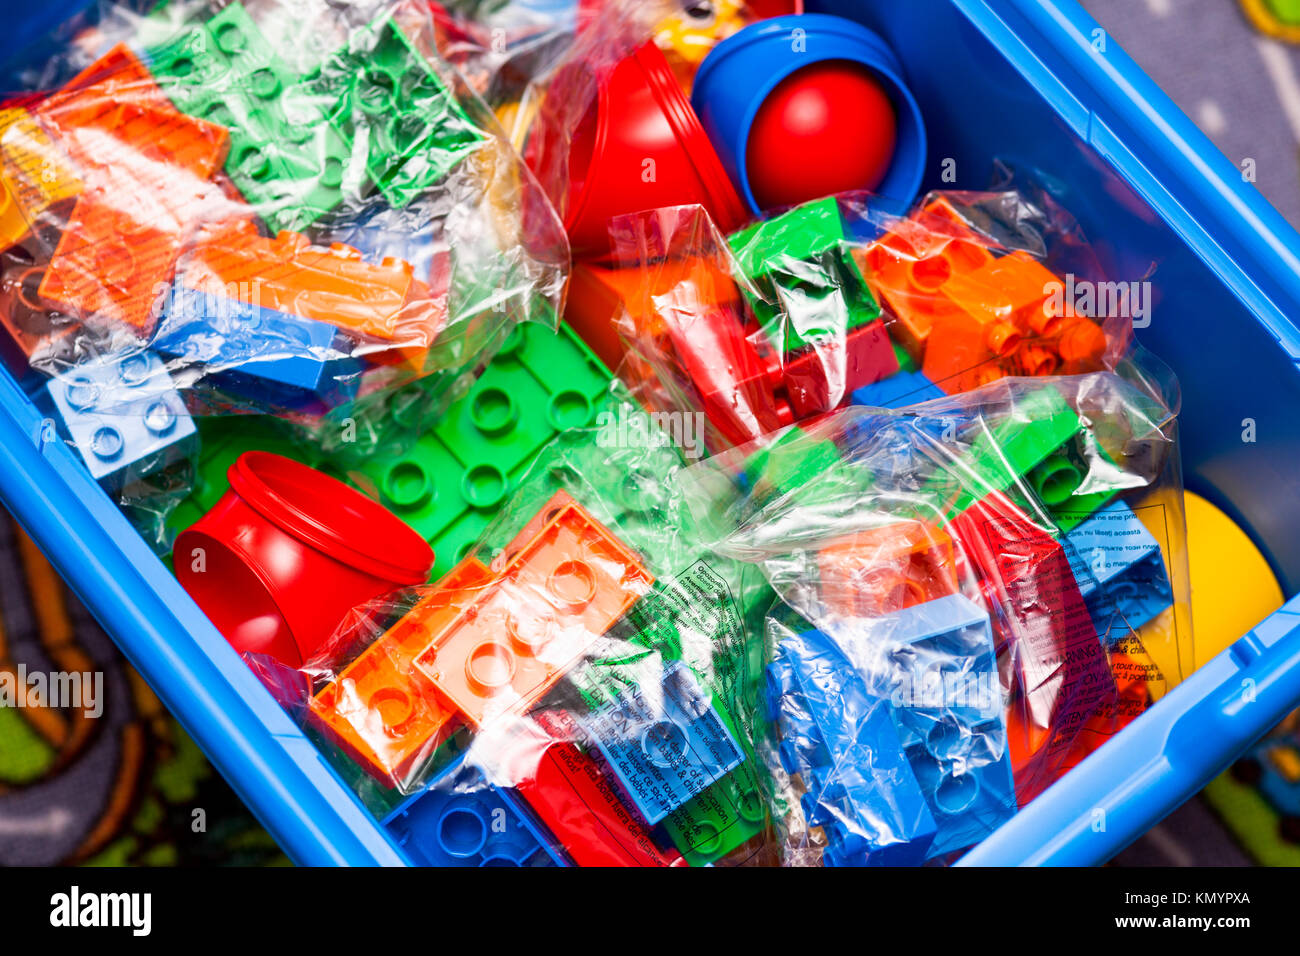 Tambov, Russian Federation - August 21, 2011 New Lego Duplo Education set  with blocks, bricks, baseplates, toys and balls in blue box Stock Photo -  Alamy